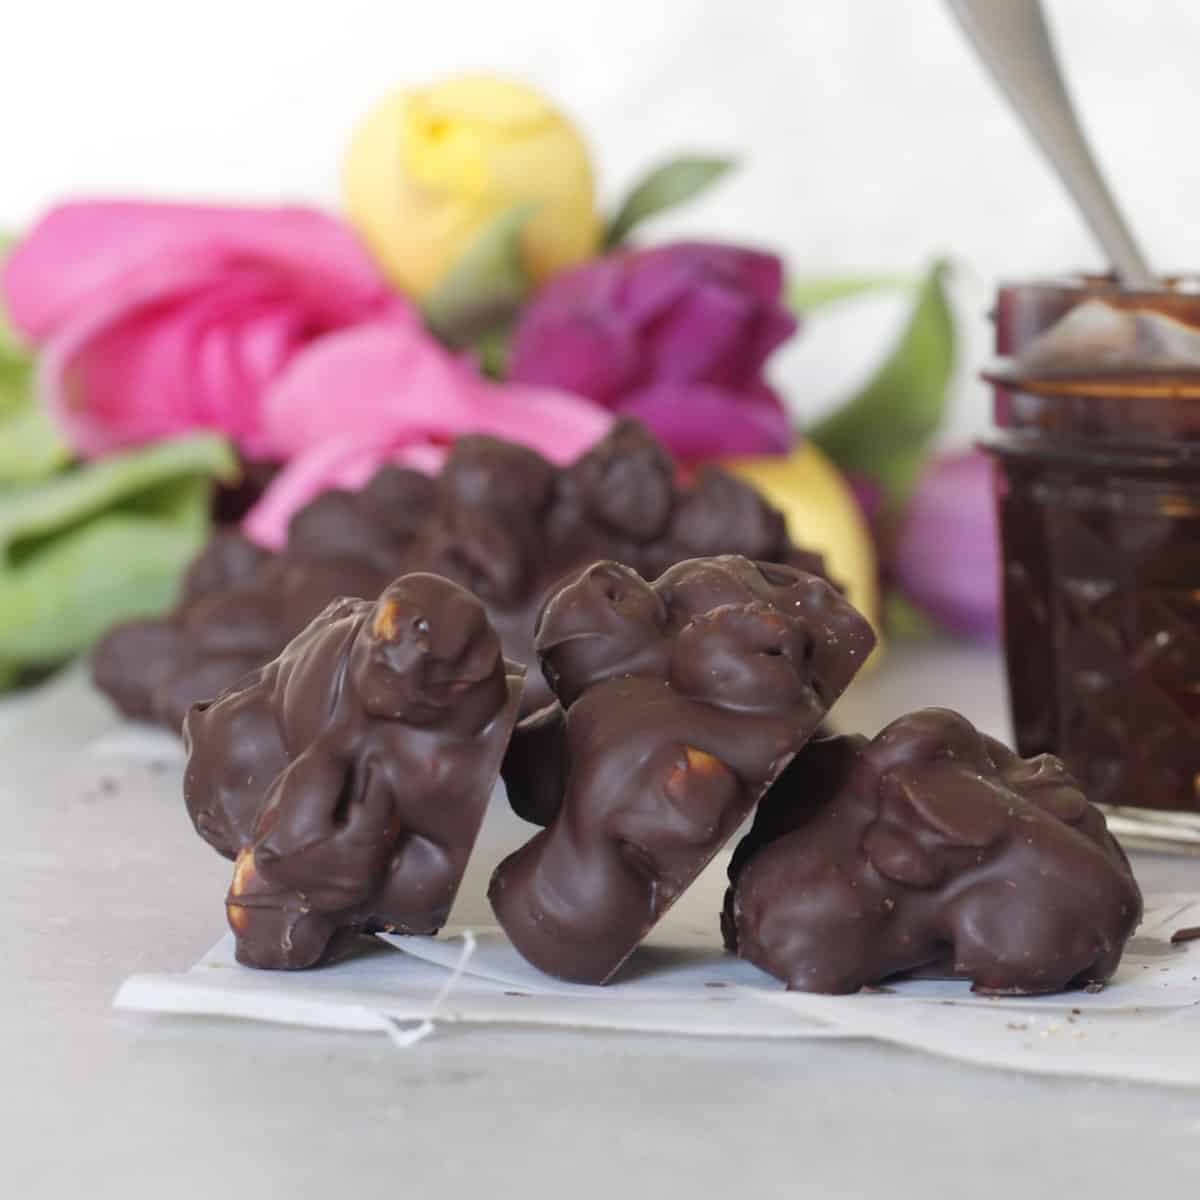 three chocolate covered chickpeas in a row.